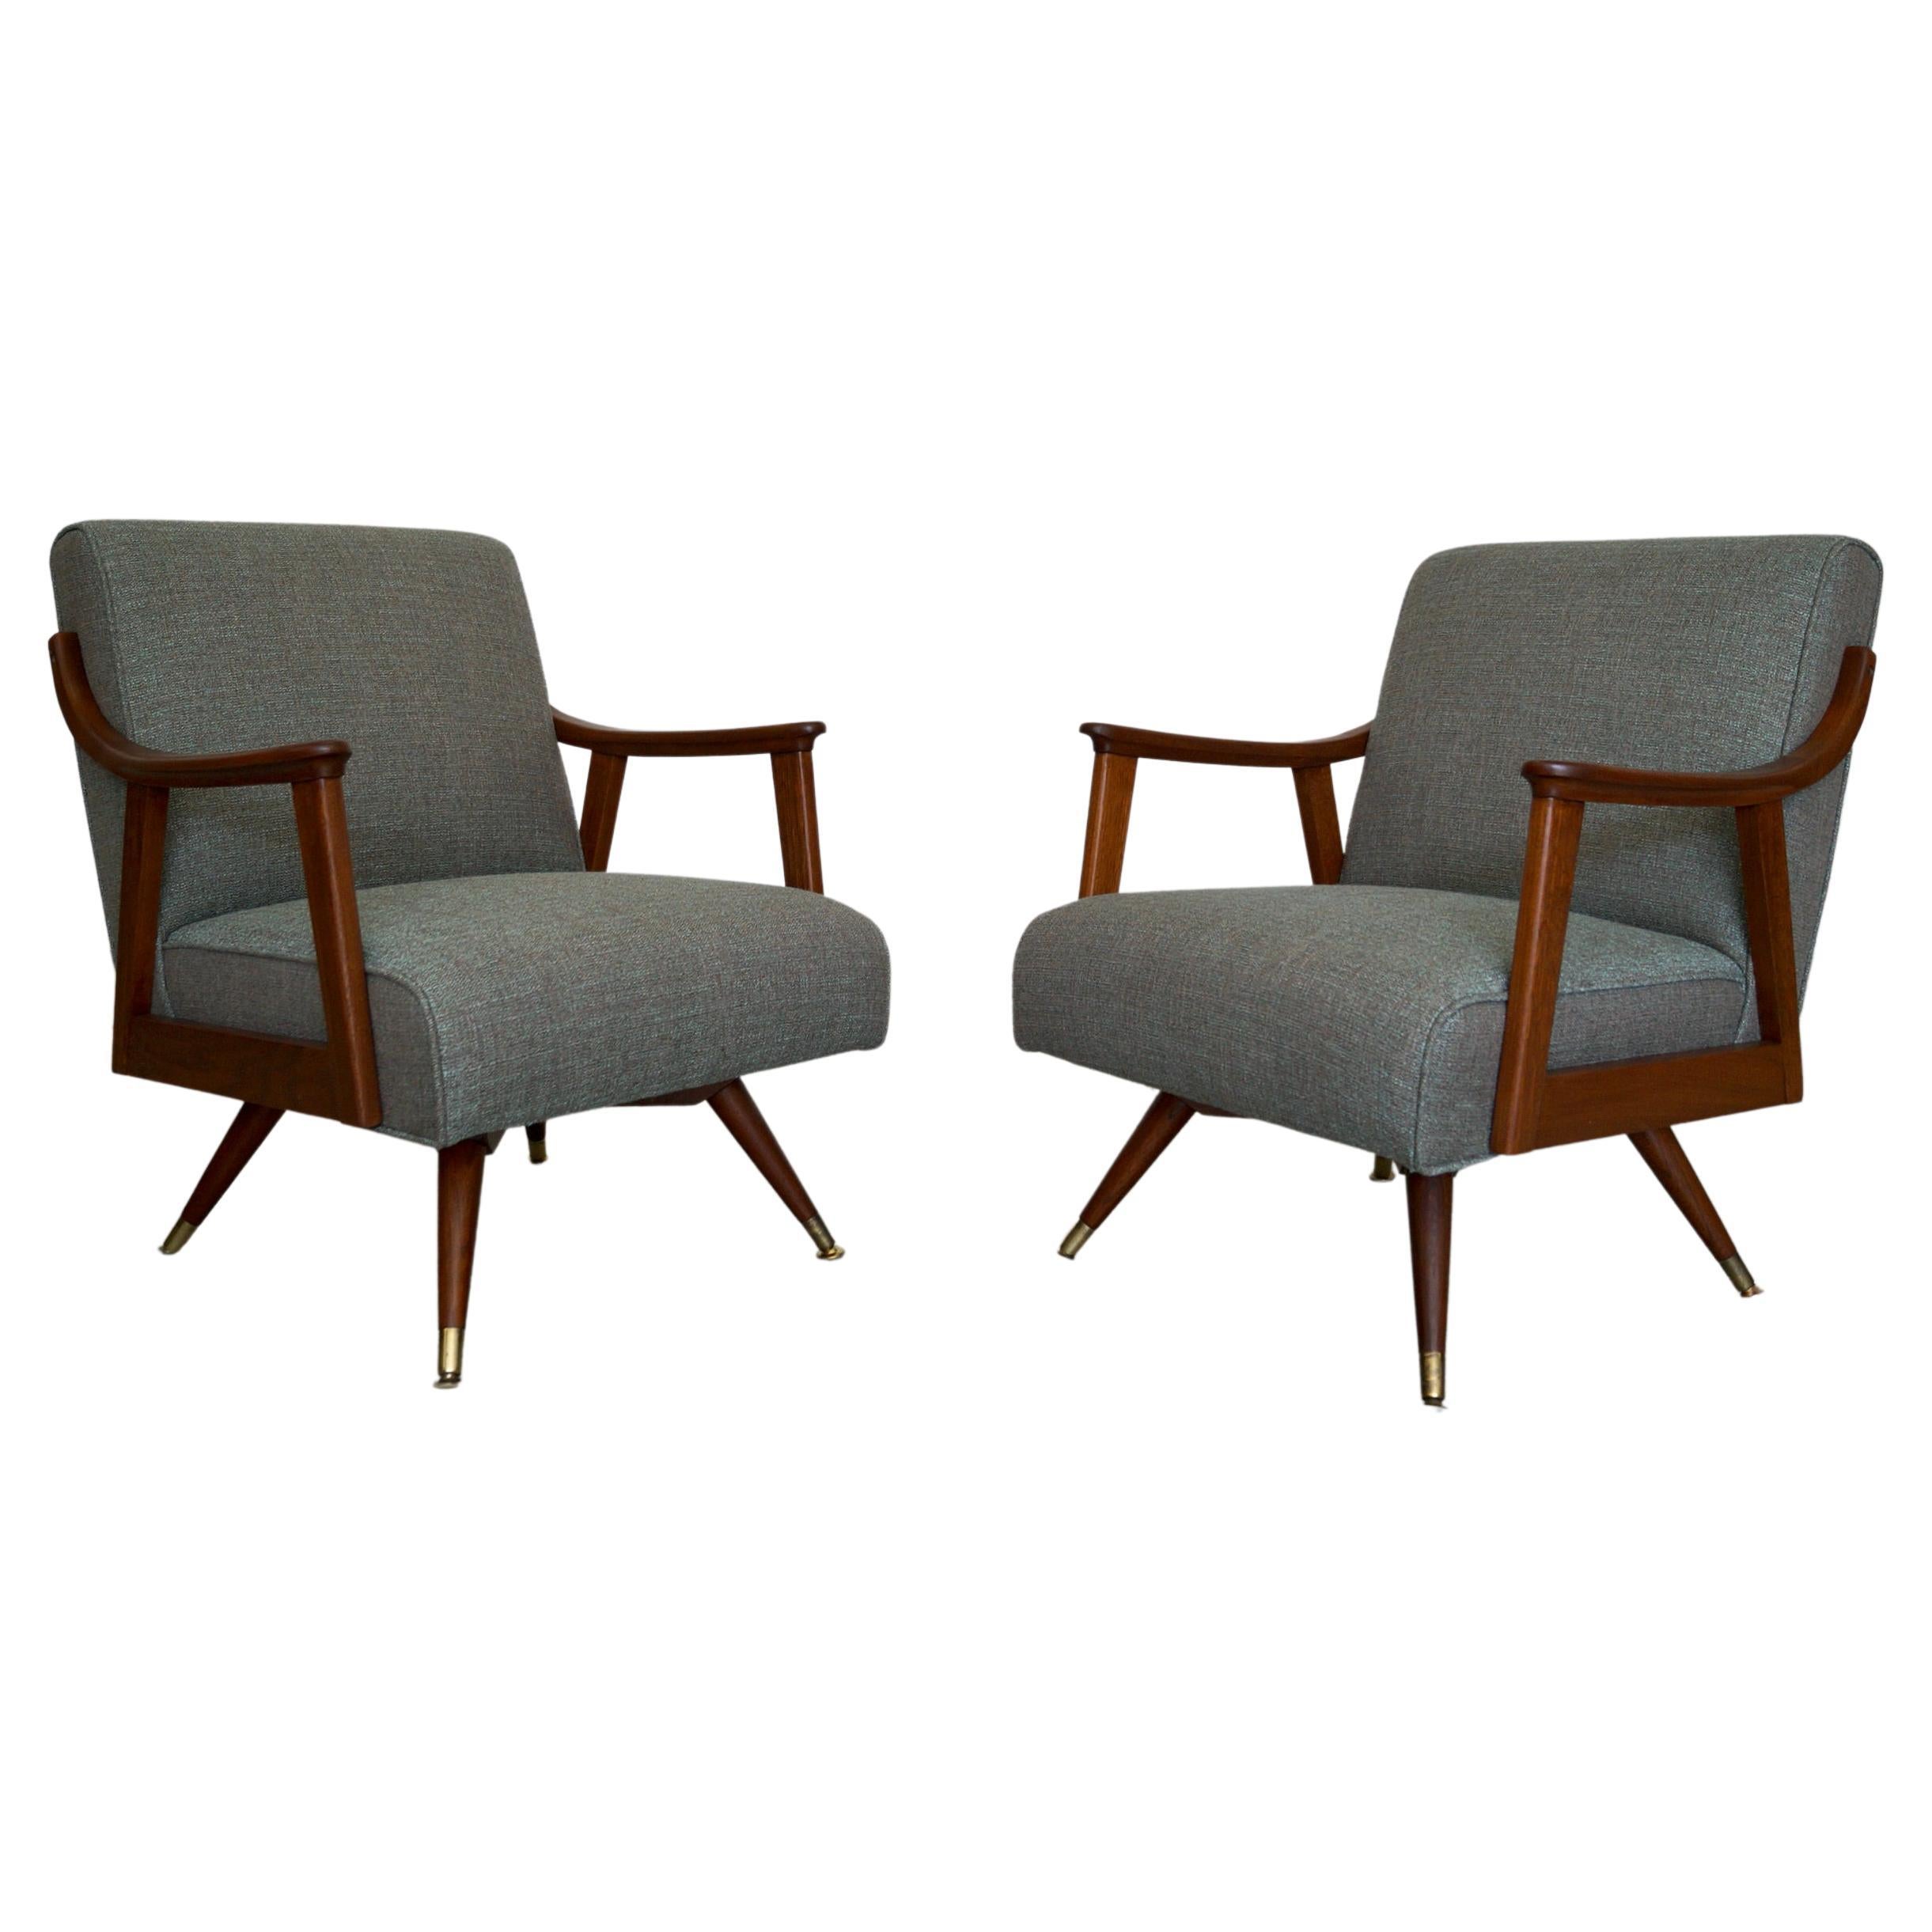 1950's Mid-Century Modern Lounge Chairs, a Pair